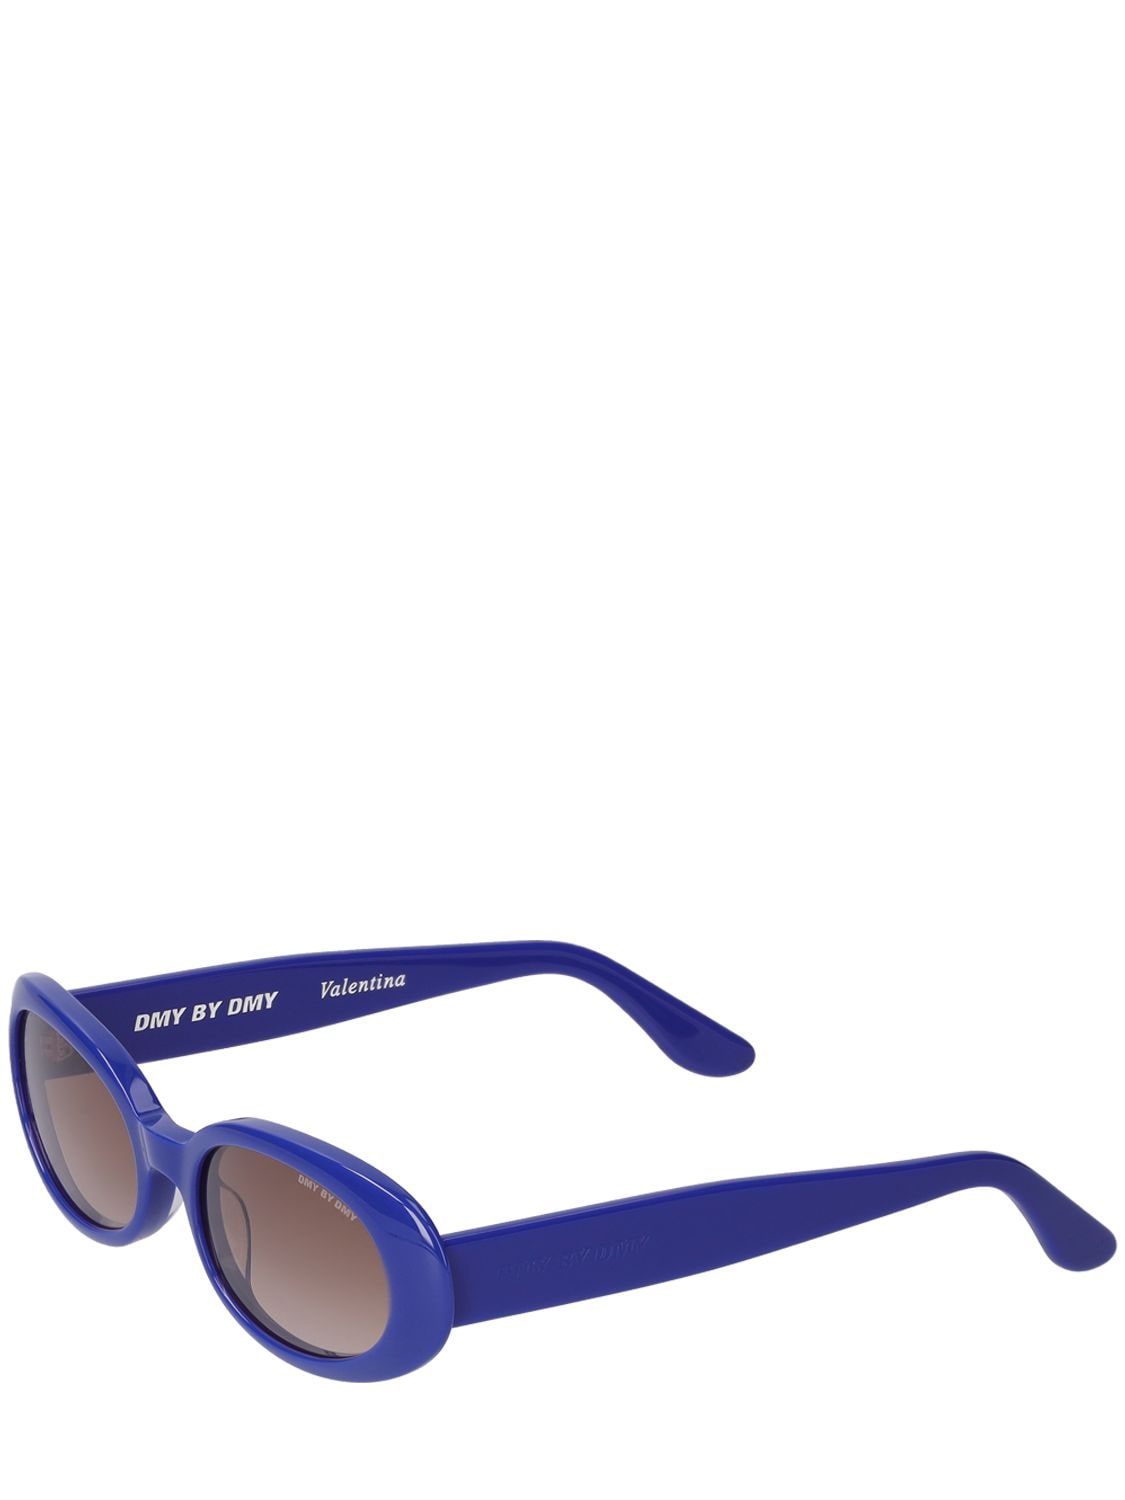 Shop Dmy By Dmy Valentina Oval Acetate Sunglasses In Blue,brown